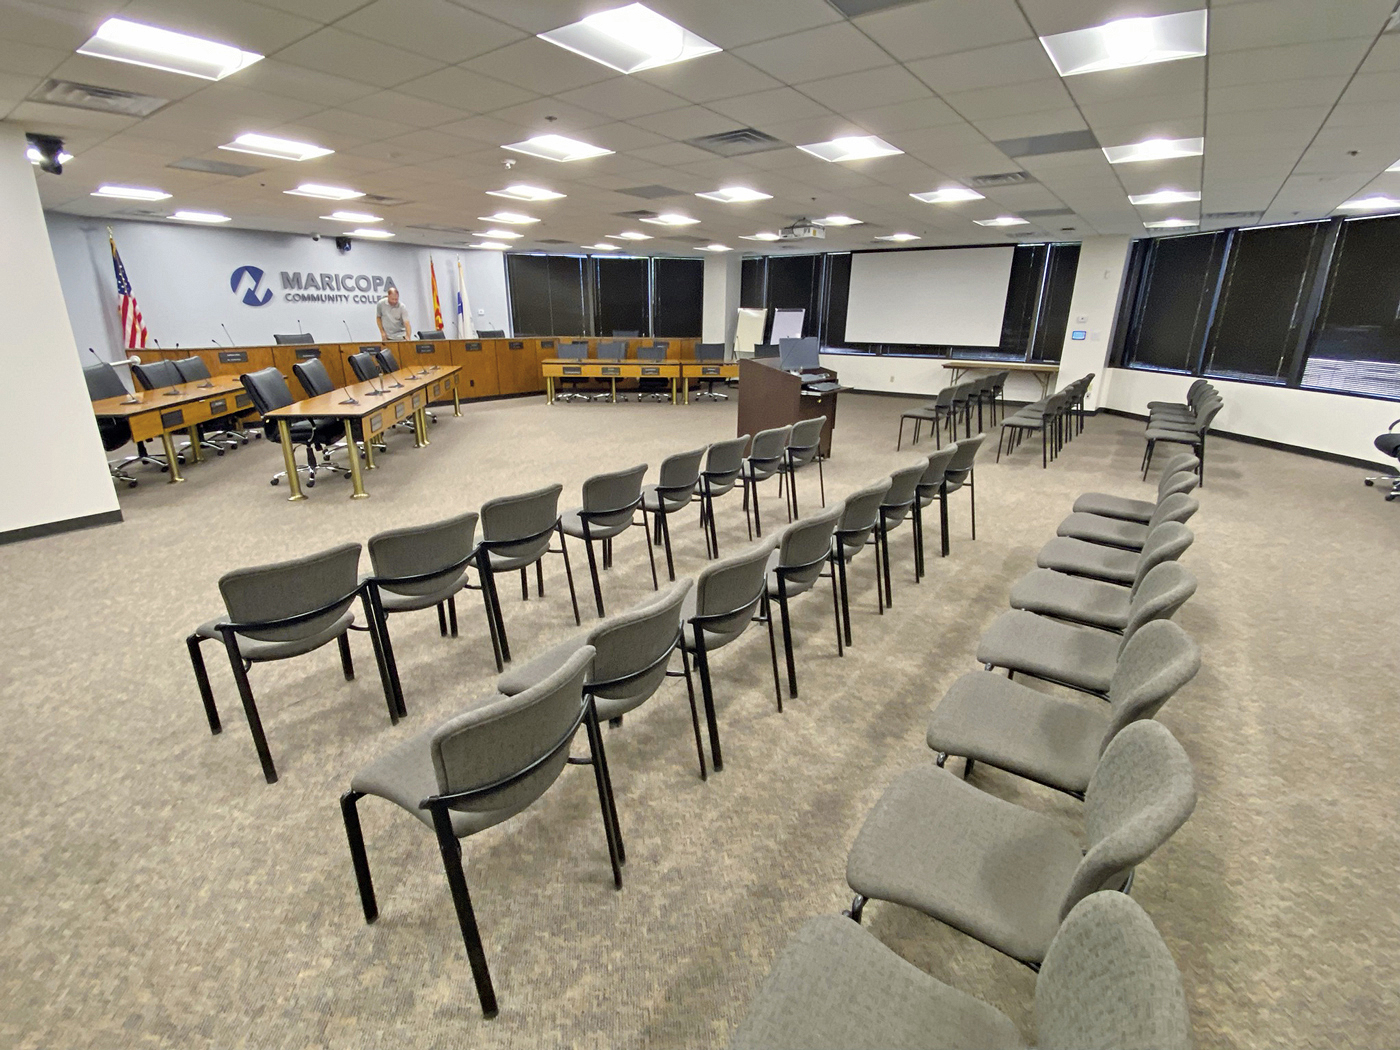 The governing board of the Maricopa County Community College District serves as a hub for organization of and guidance for higher learning. The board is responsible for planning and tracking the progress of programs for the ten colleges in the district.